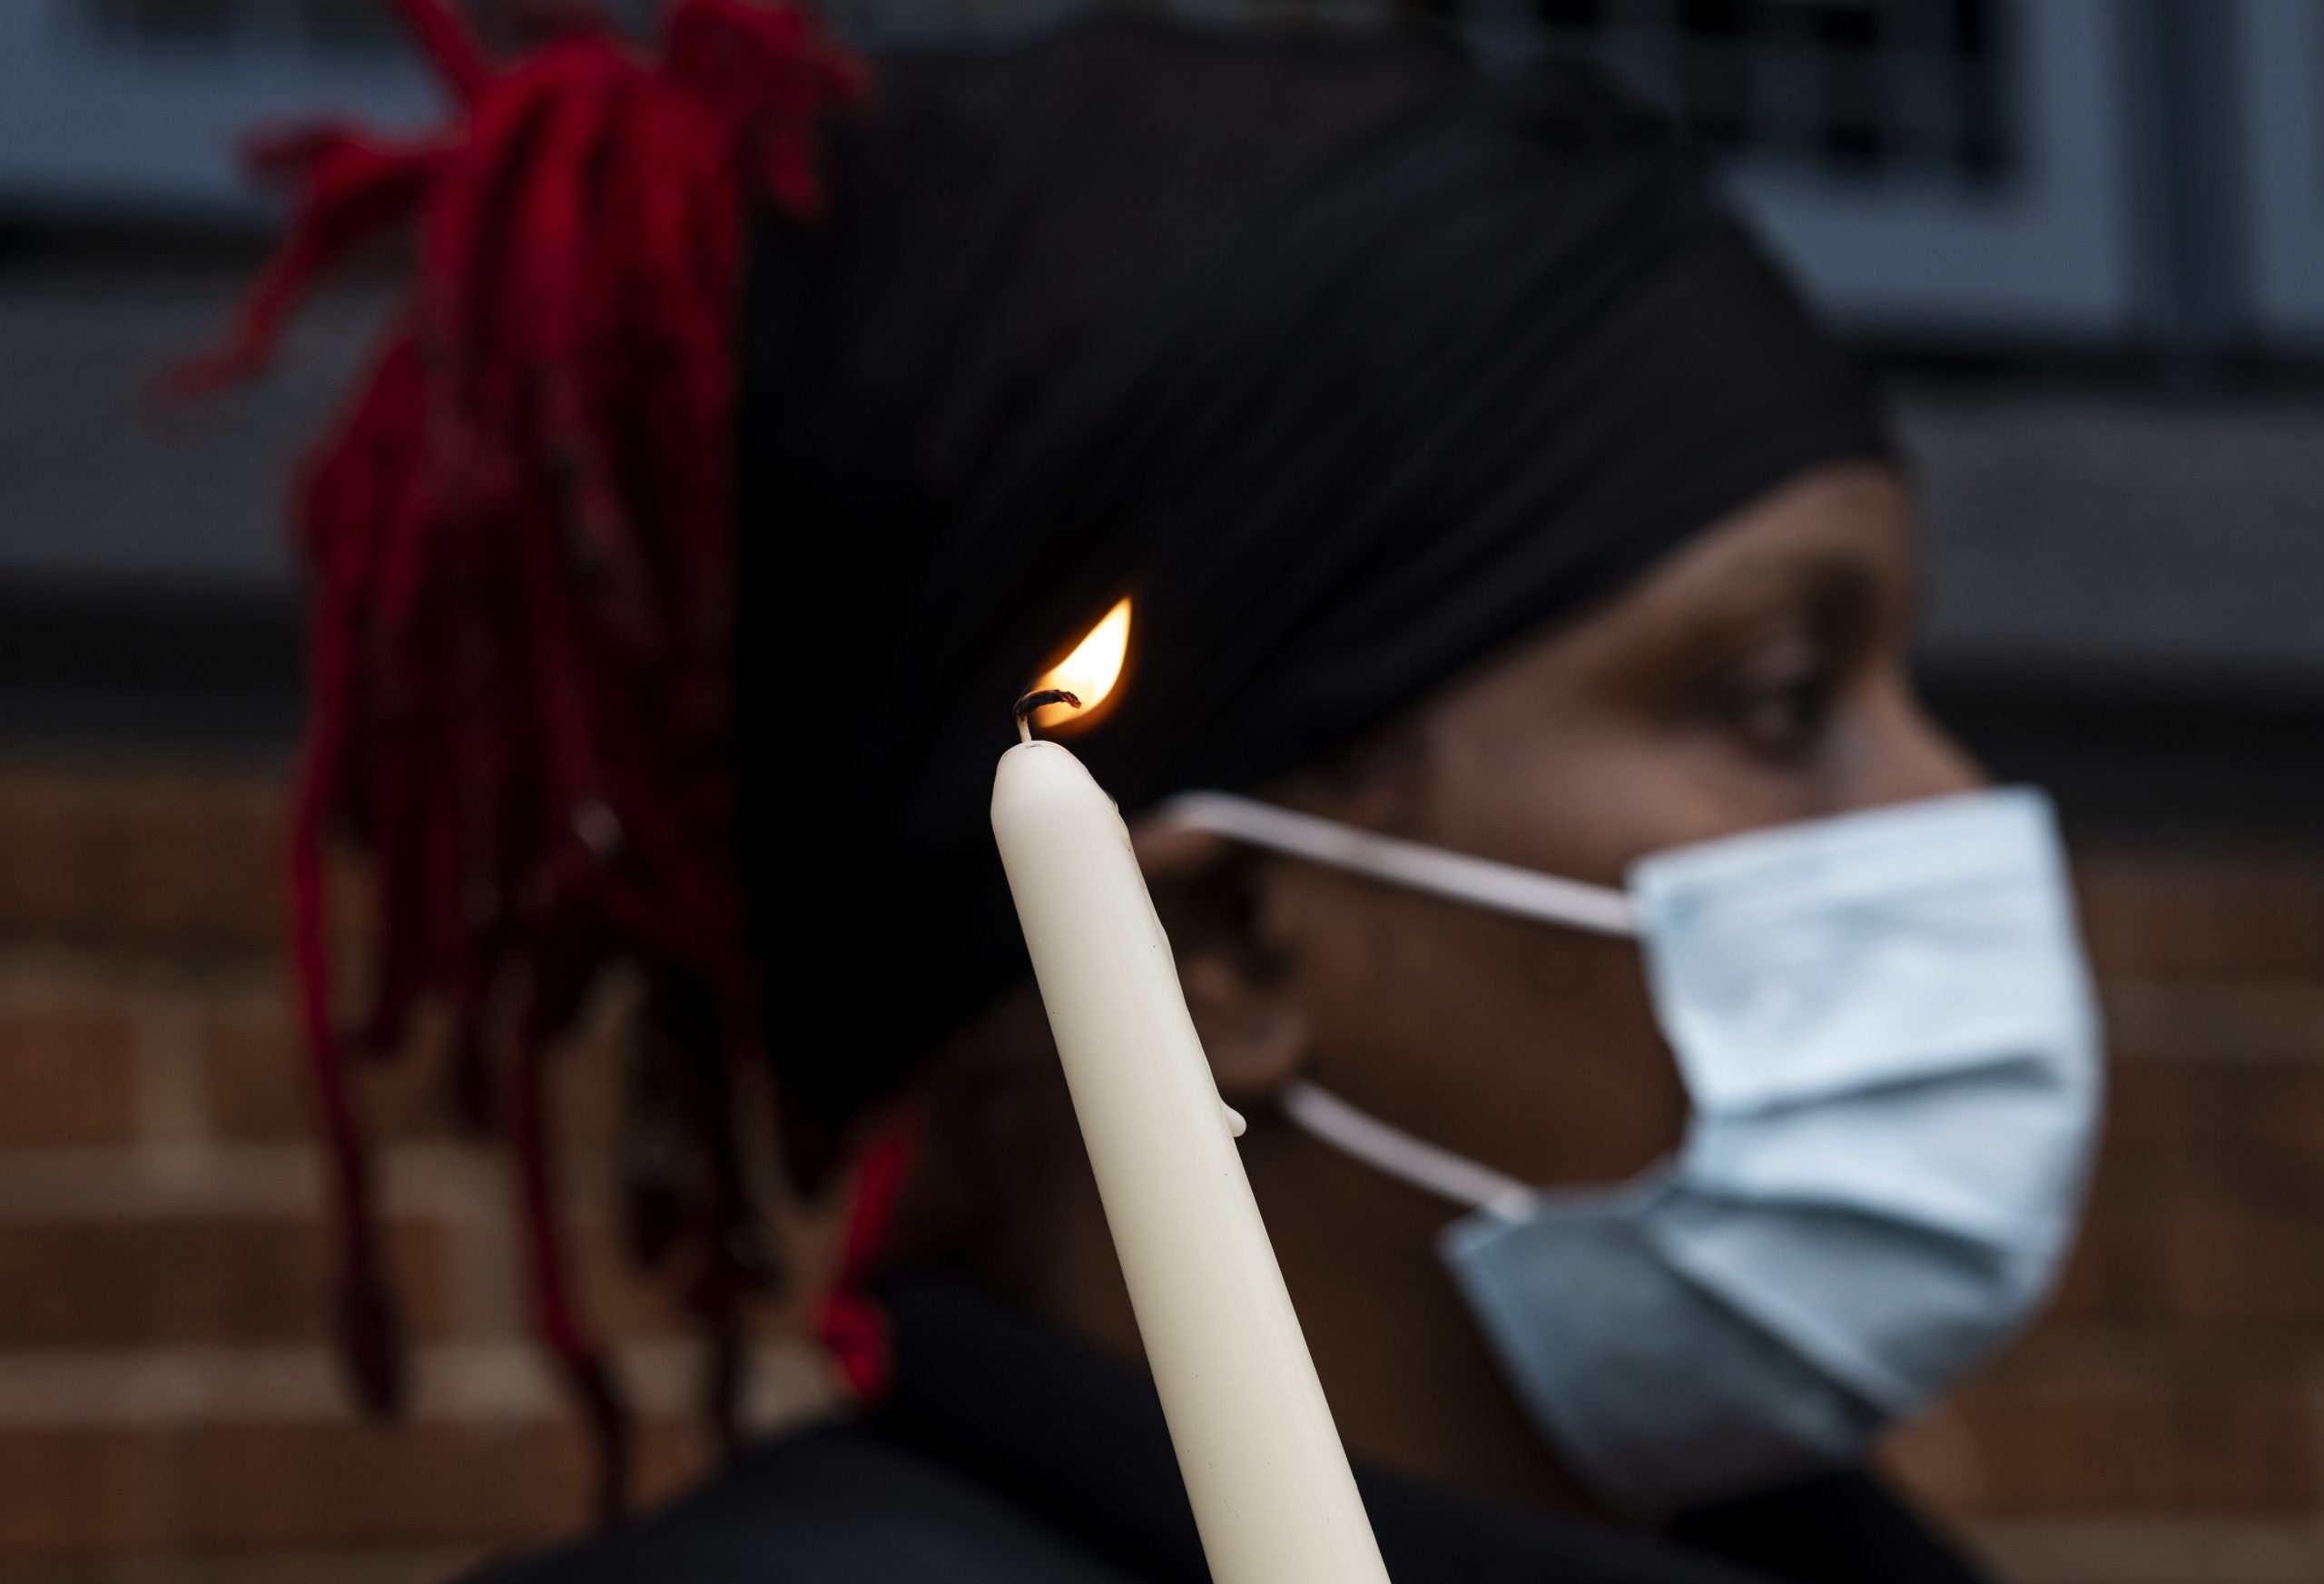 14 Powerful Images Of Black Women On The Front Lines Of The Coronavirus Pandemic